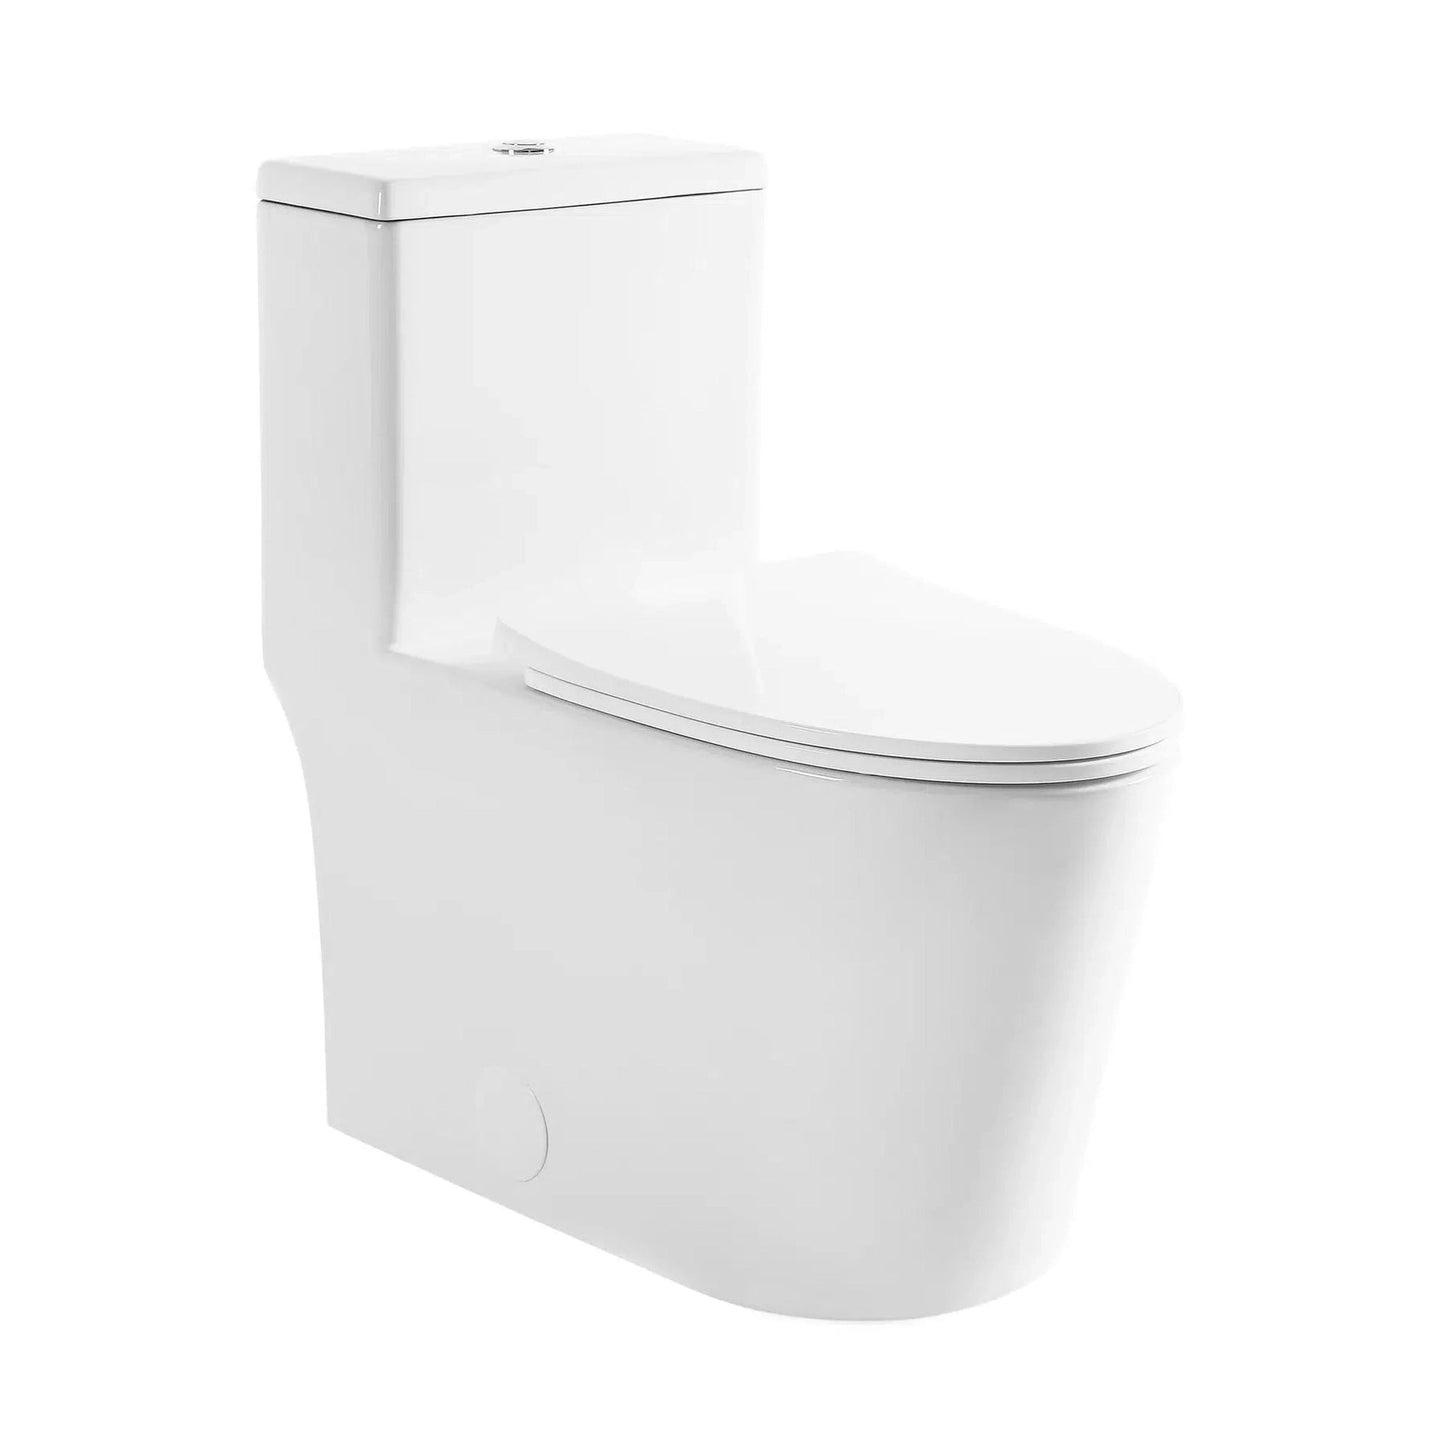 Swiss Madison Dreux 15" x 31" White One-Piece Elongated High Efficiency Floor-Mounted Glazed Ceramic Toilet With 0.8 GPF Water Saving Patented Technology